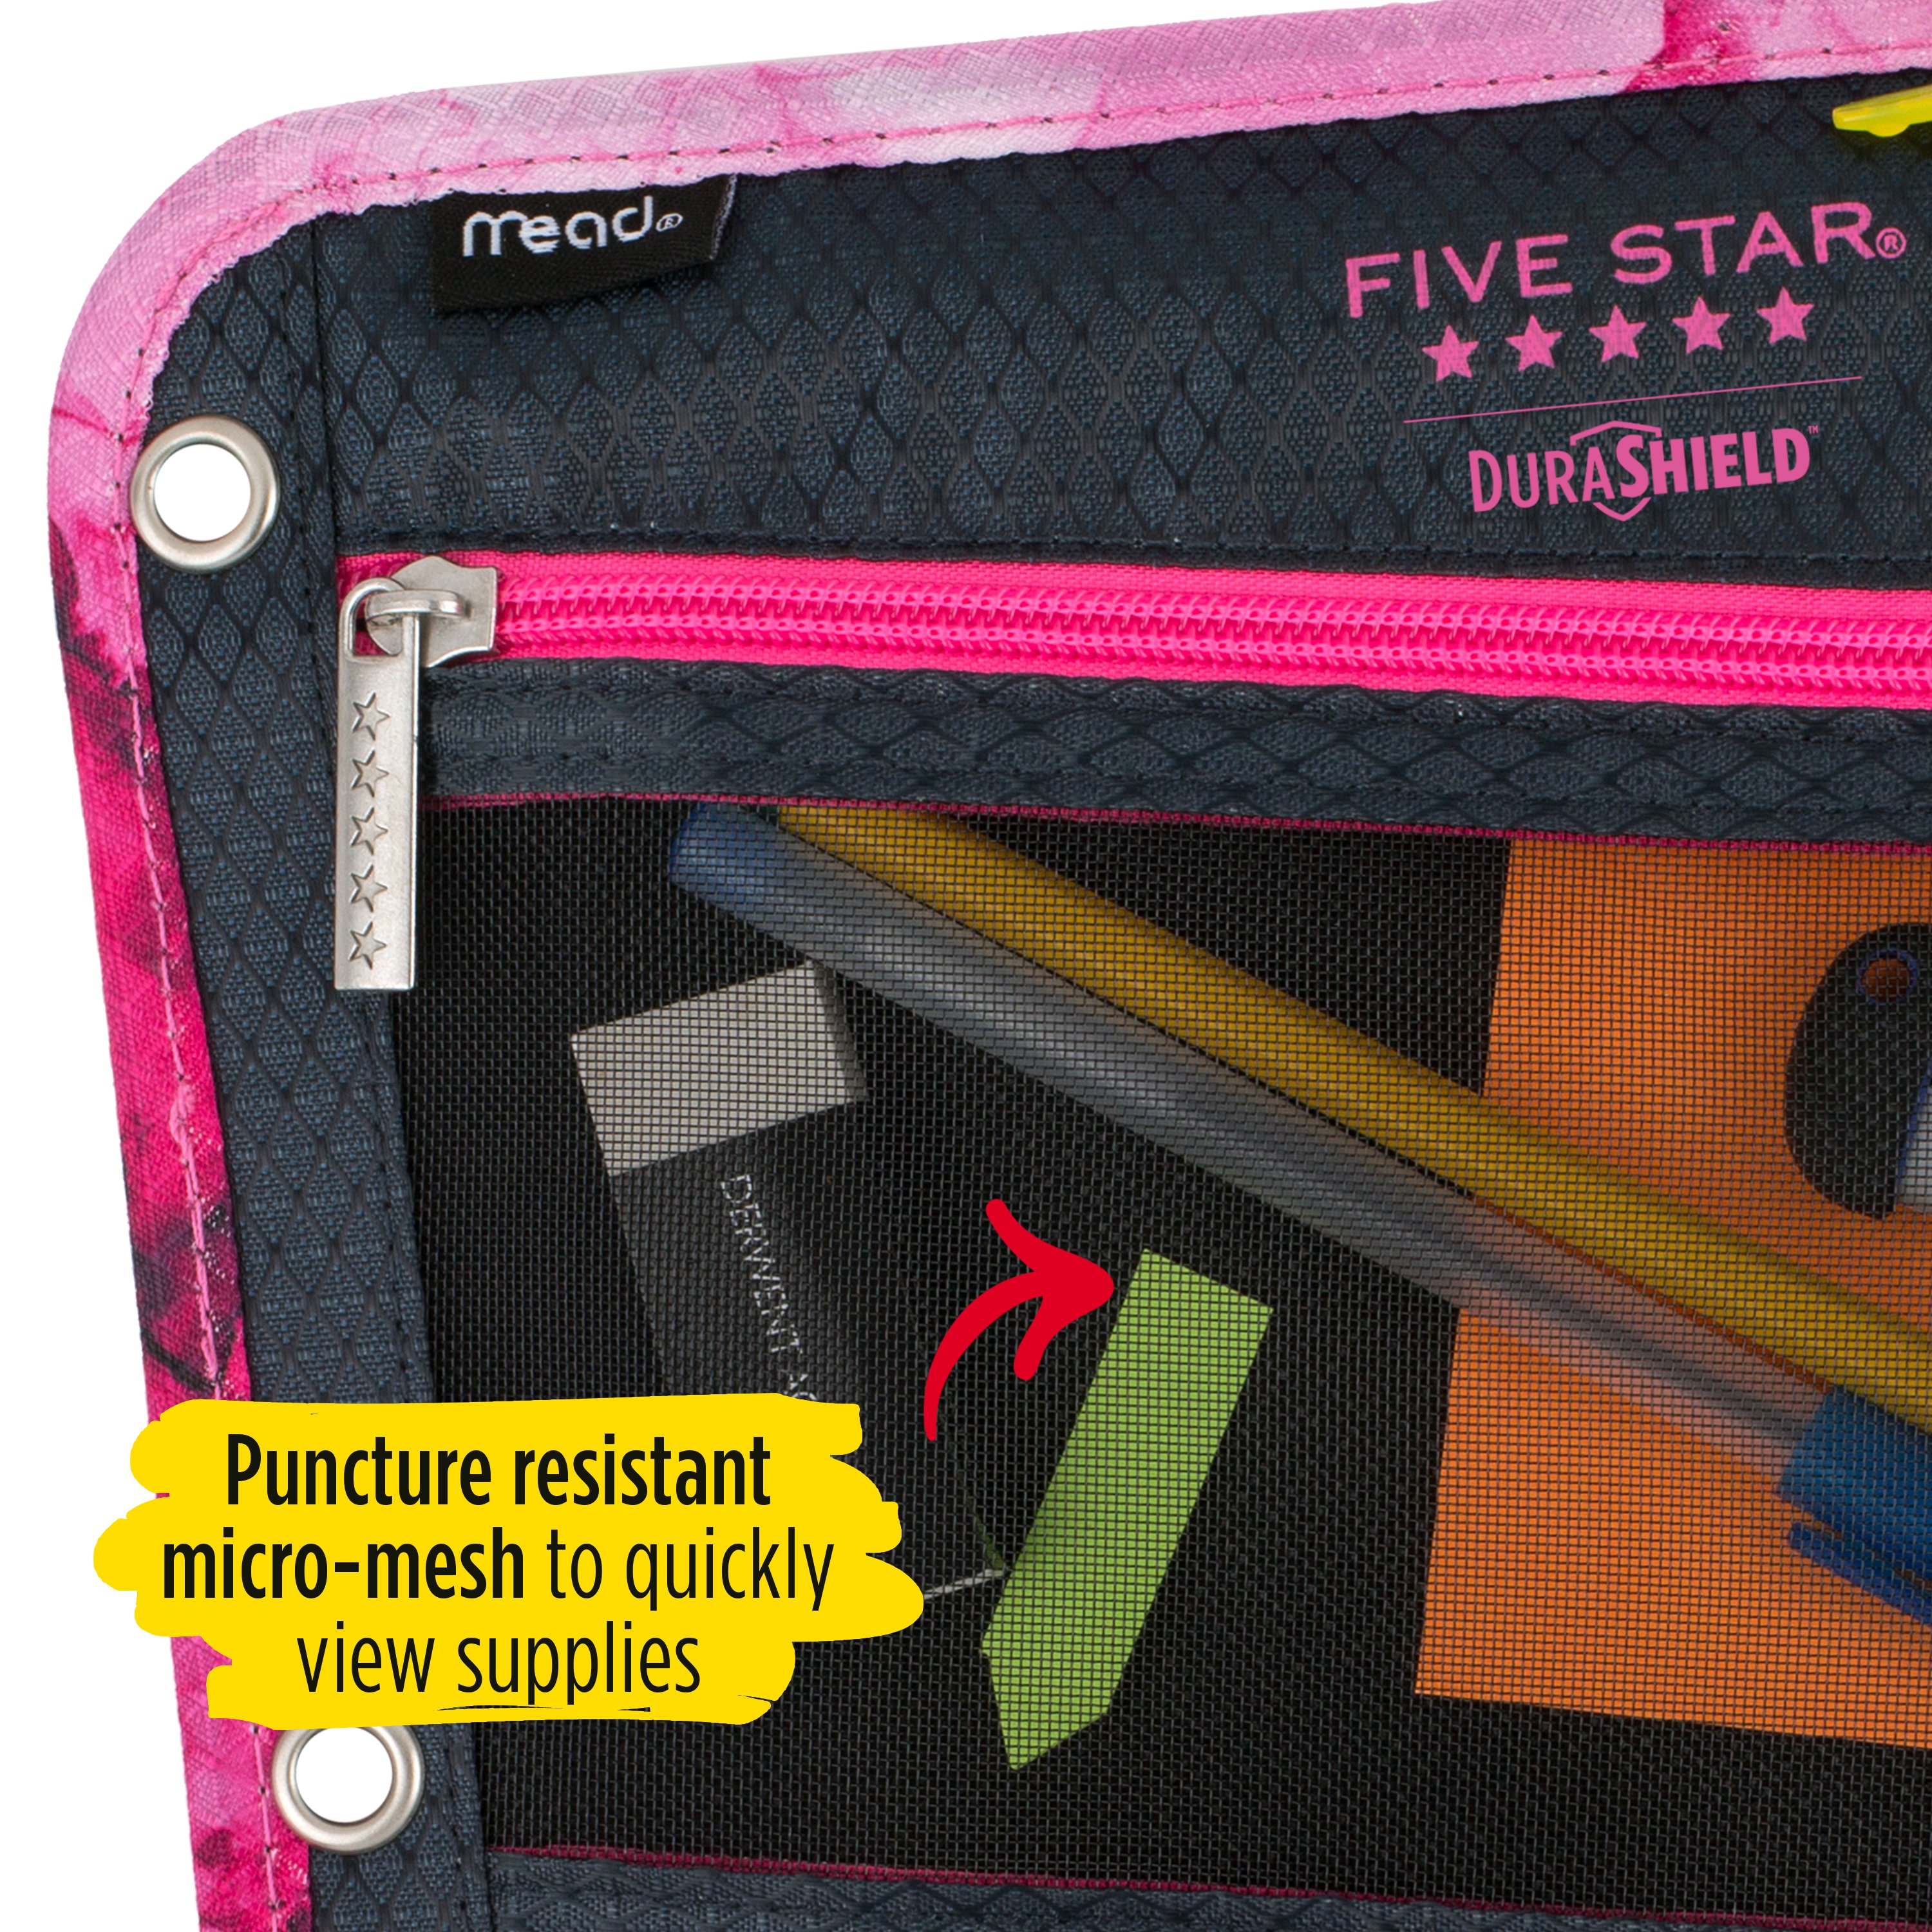 Five Star DuraShield Antimicrobial Flat Pencil Pouch, Pink (500023MD0-WMT)  